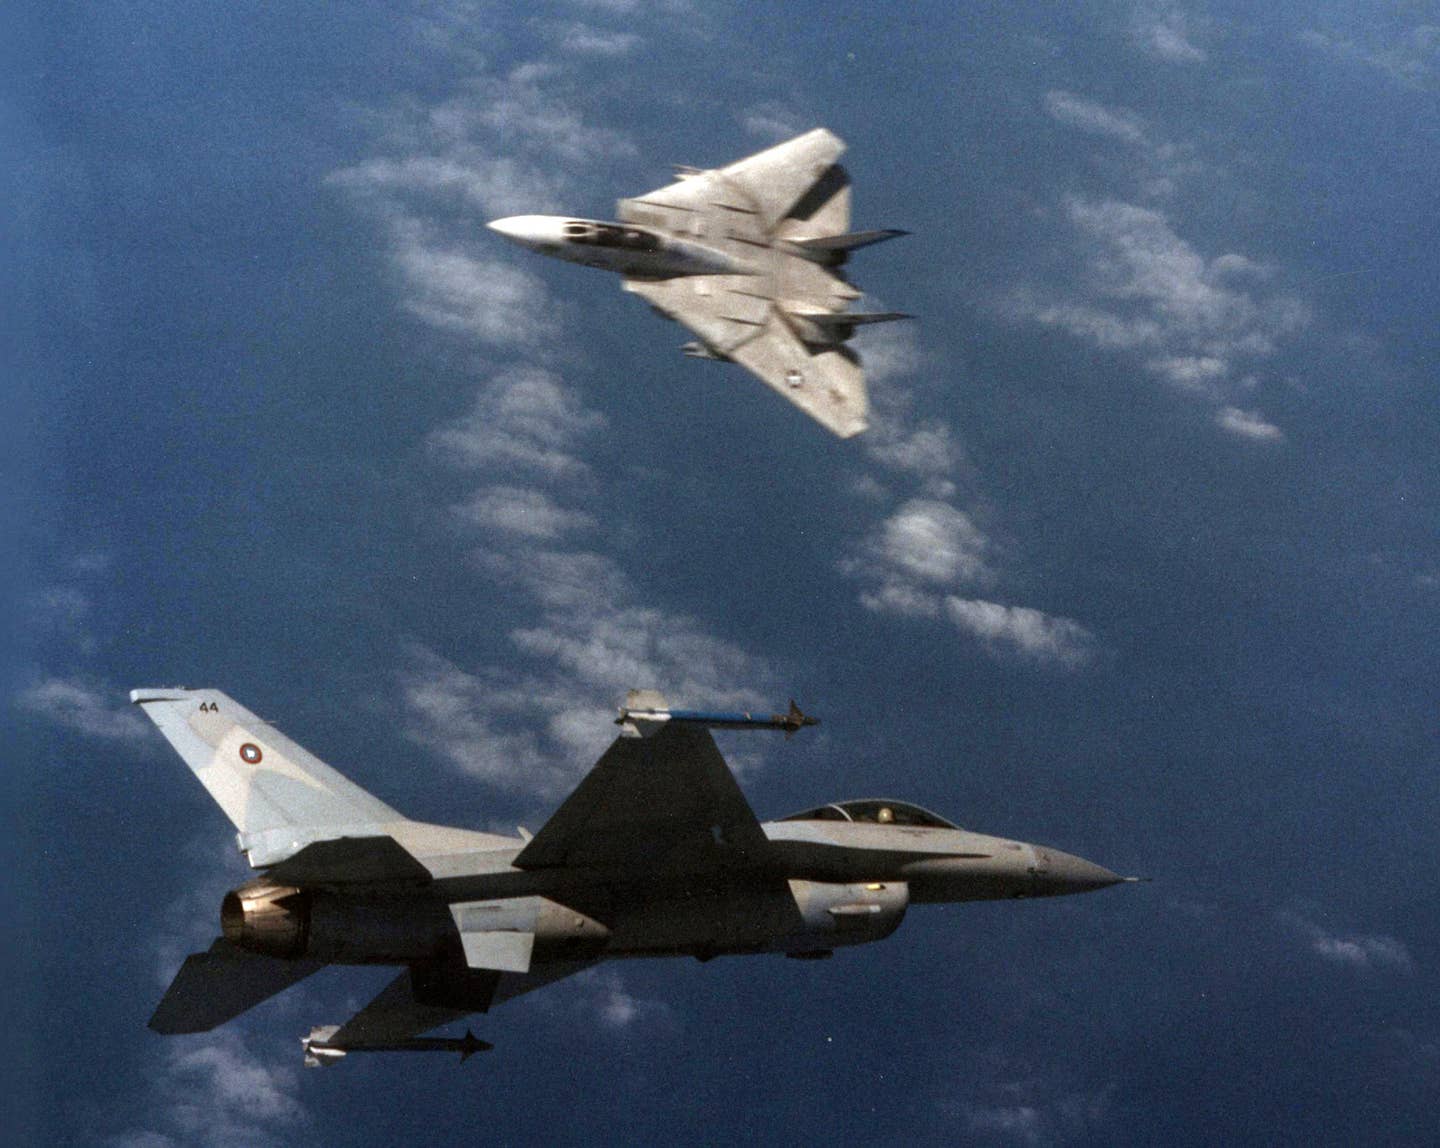 U.S. Navy Grumman F-14A Tomcat of Fighter Squadron 213 (VF-213) "Black Lions" engages a General Dynamics F-16N <em>Viper</em> aggressor aircraft during training at the Navy Fighter Weapons School (TOPGUN) at Naval Air Station Miramar, California, in March 1989.